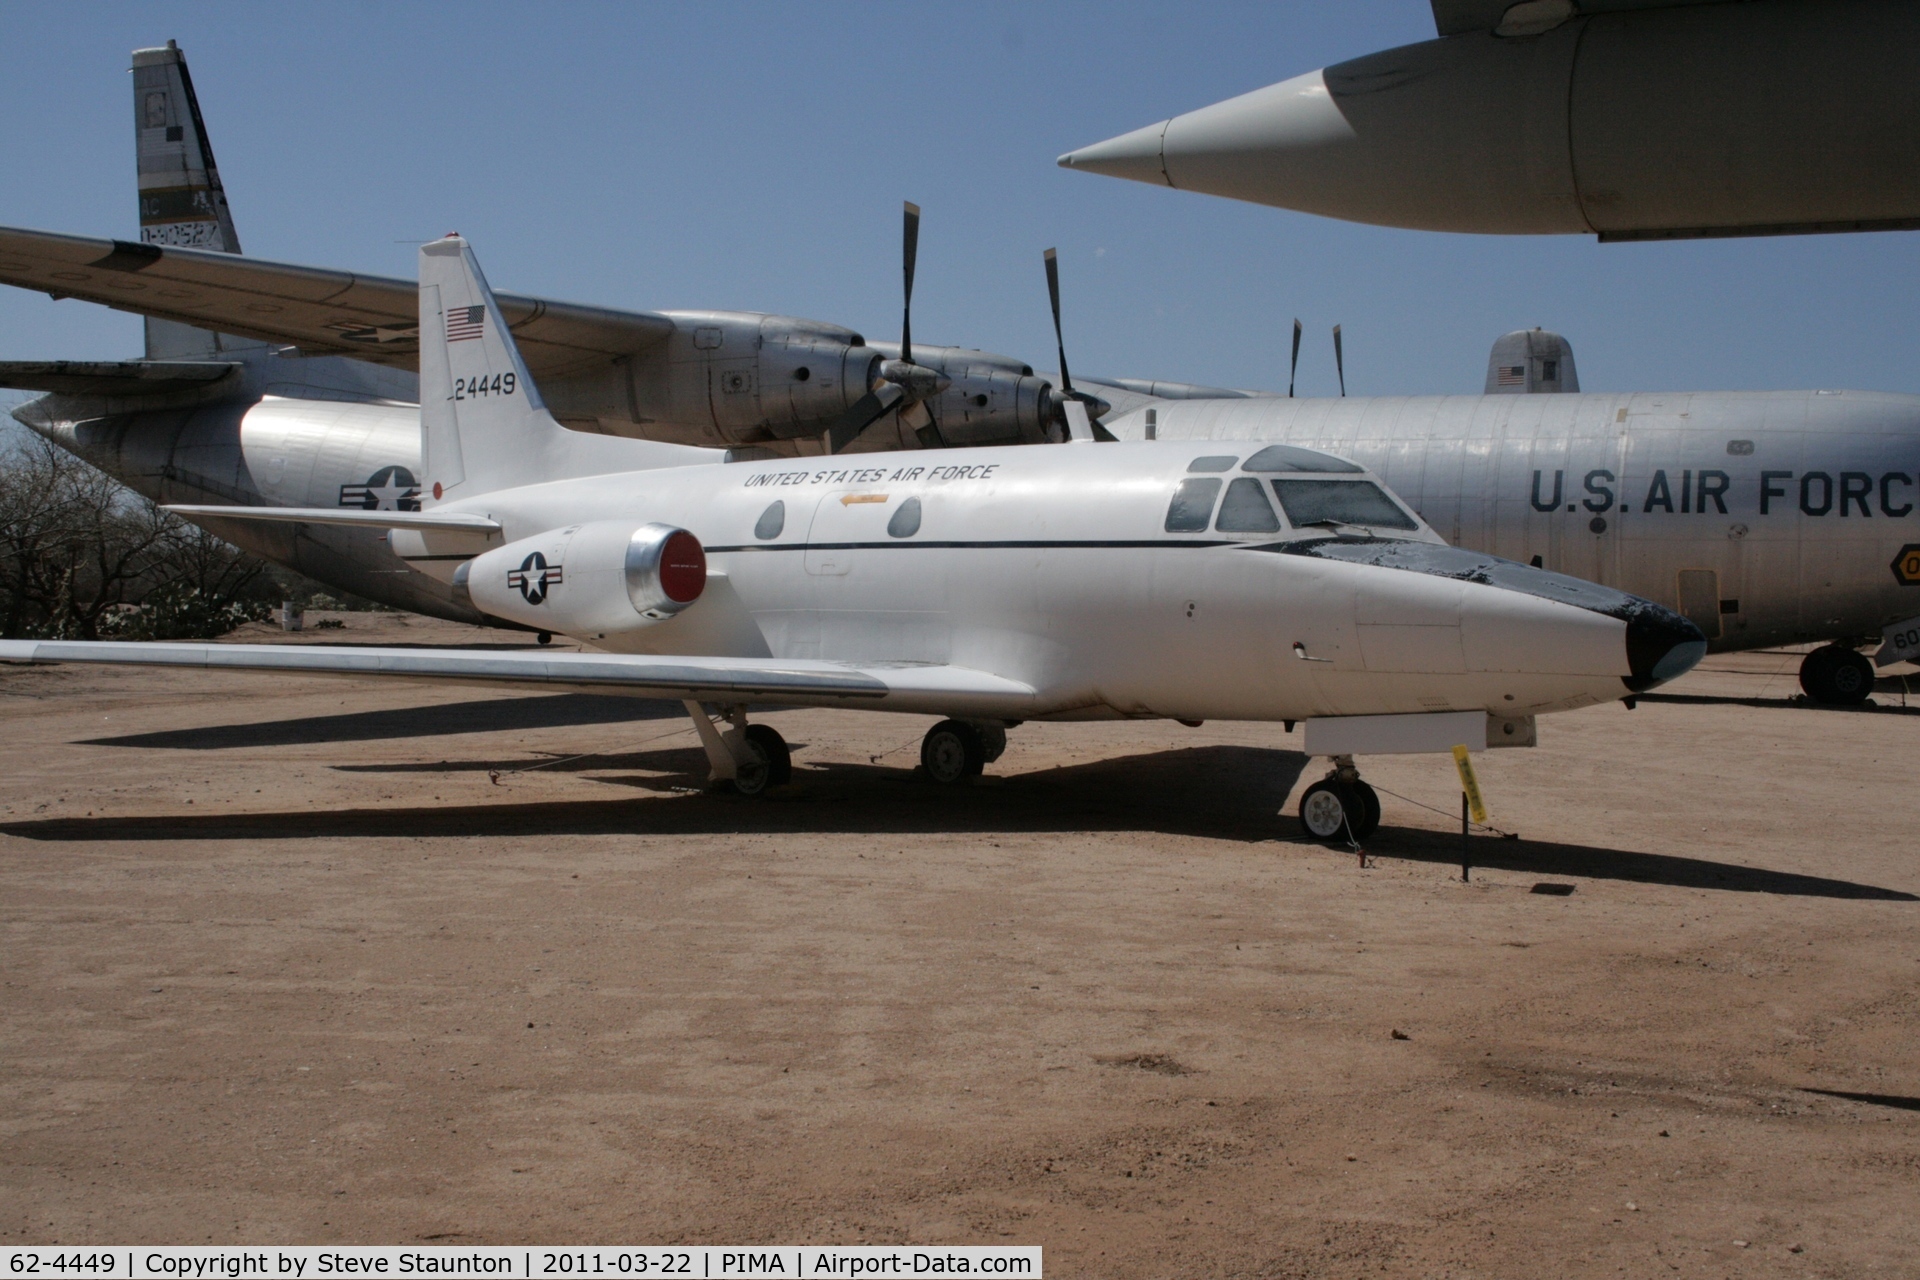 62-4449, 1962 North American CT-39A Sabreliner C/N 276-2, Taken at Pima Air and Space Museum, in March 2011 whilst on an Aeroprint Aviation tour